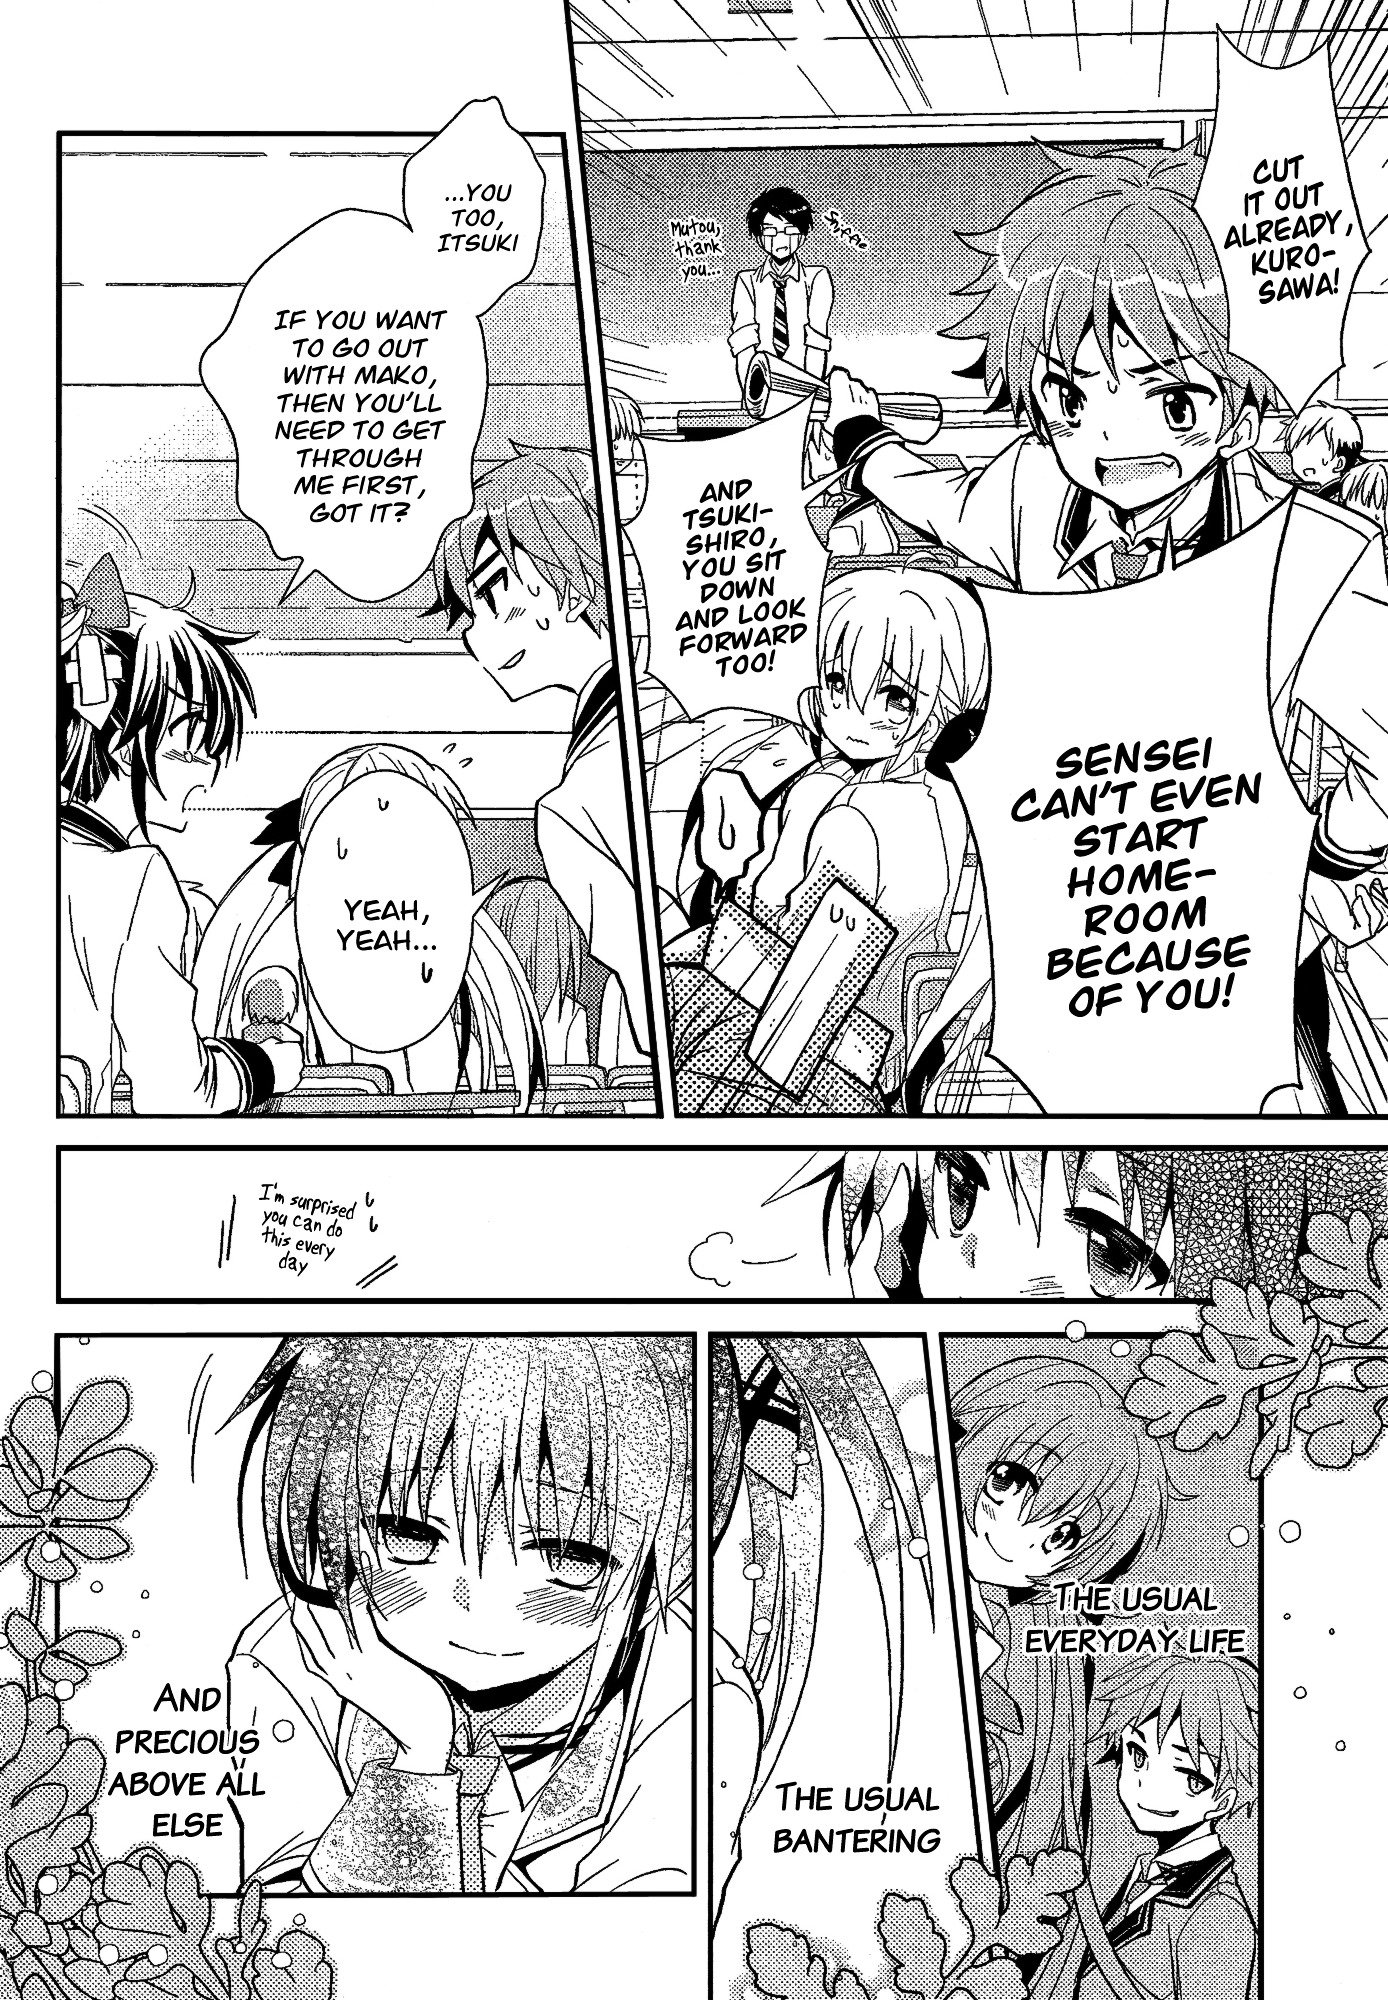 Selector Infected Wixoss - Re/verse - Chapter 1 #7